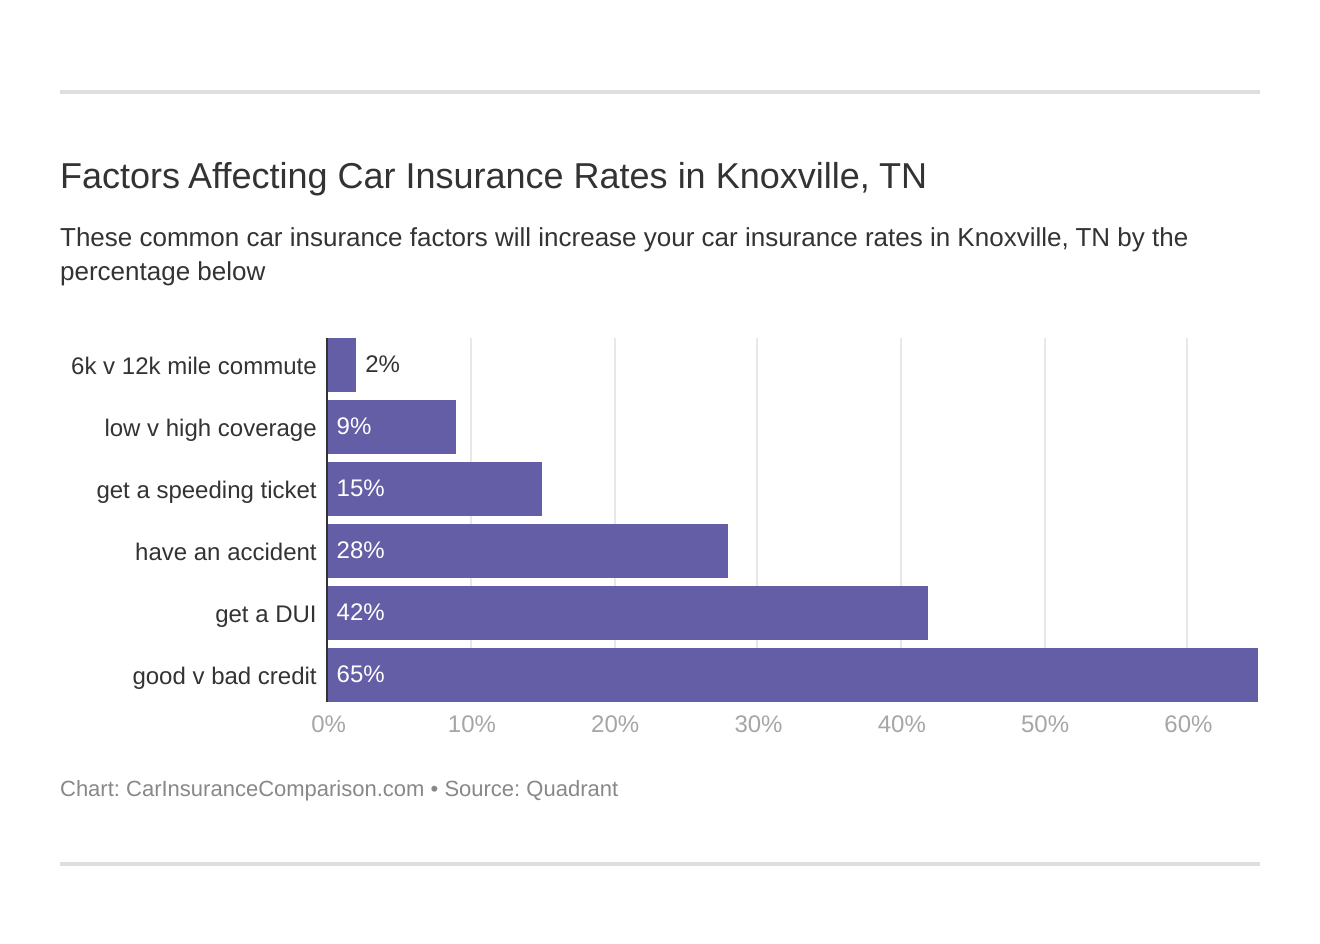 Factors Affecting Car Insurance Rates in Knoxville, TN